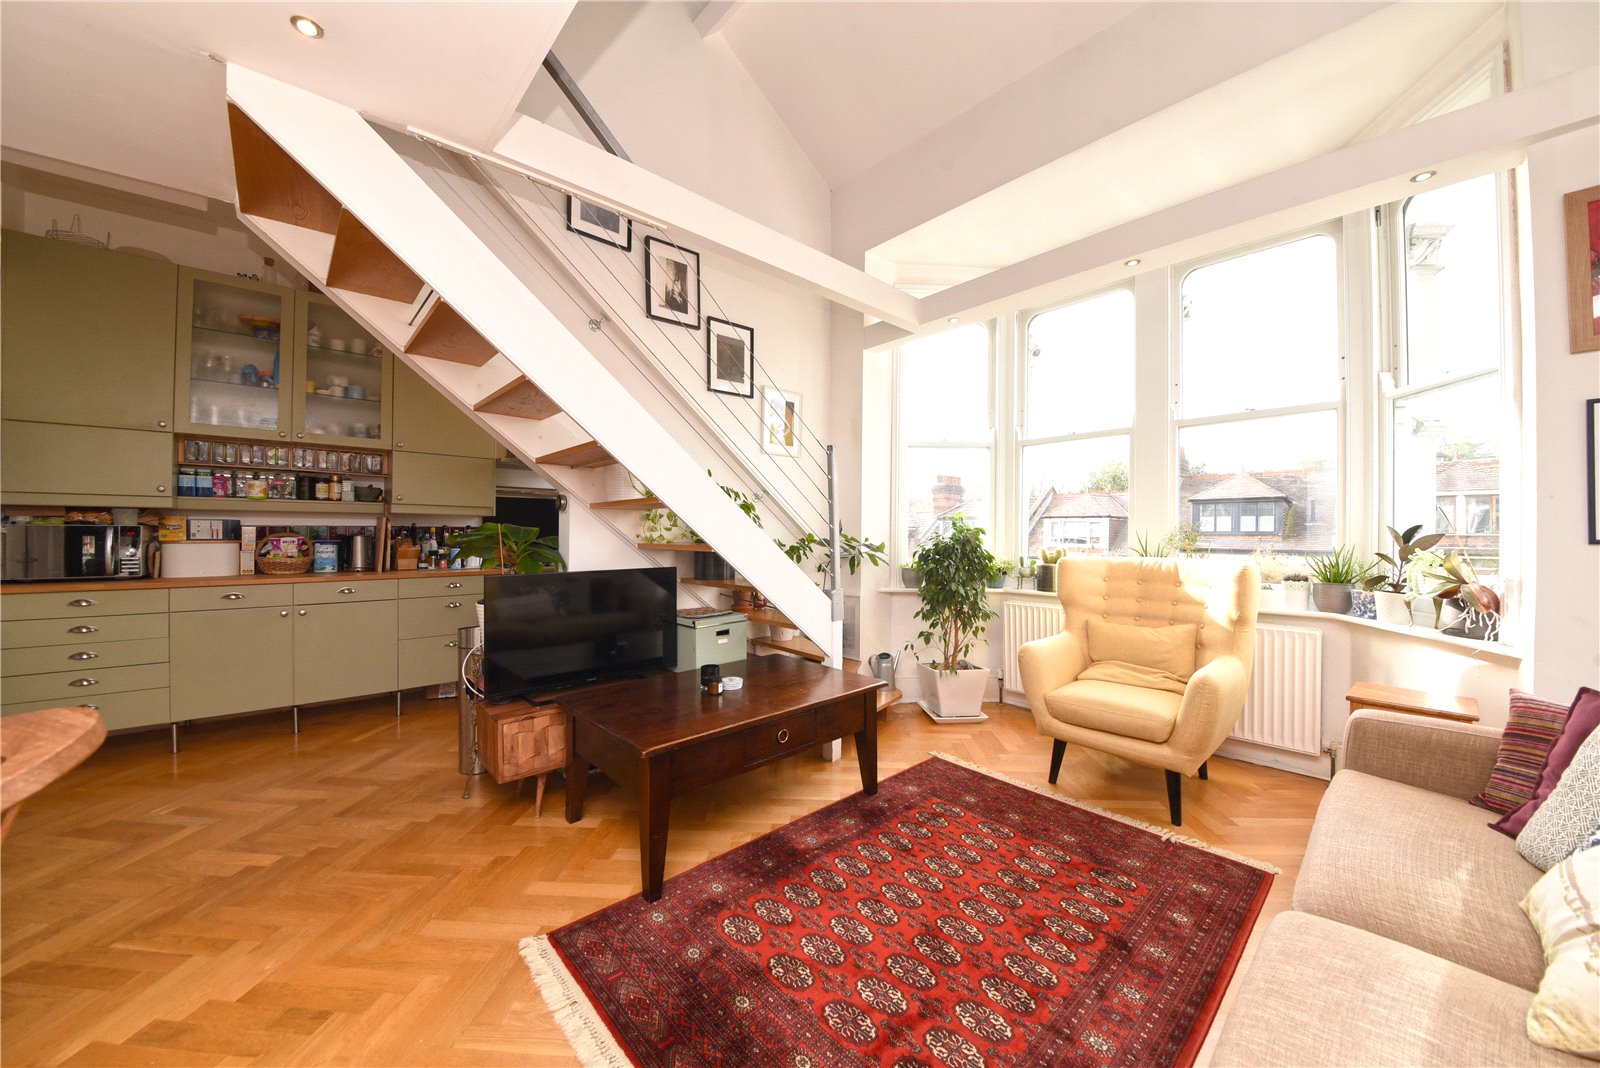 2 bed apartment for sale in Archway Road, Highgate - Property Image 1